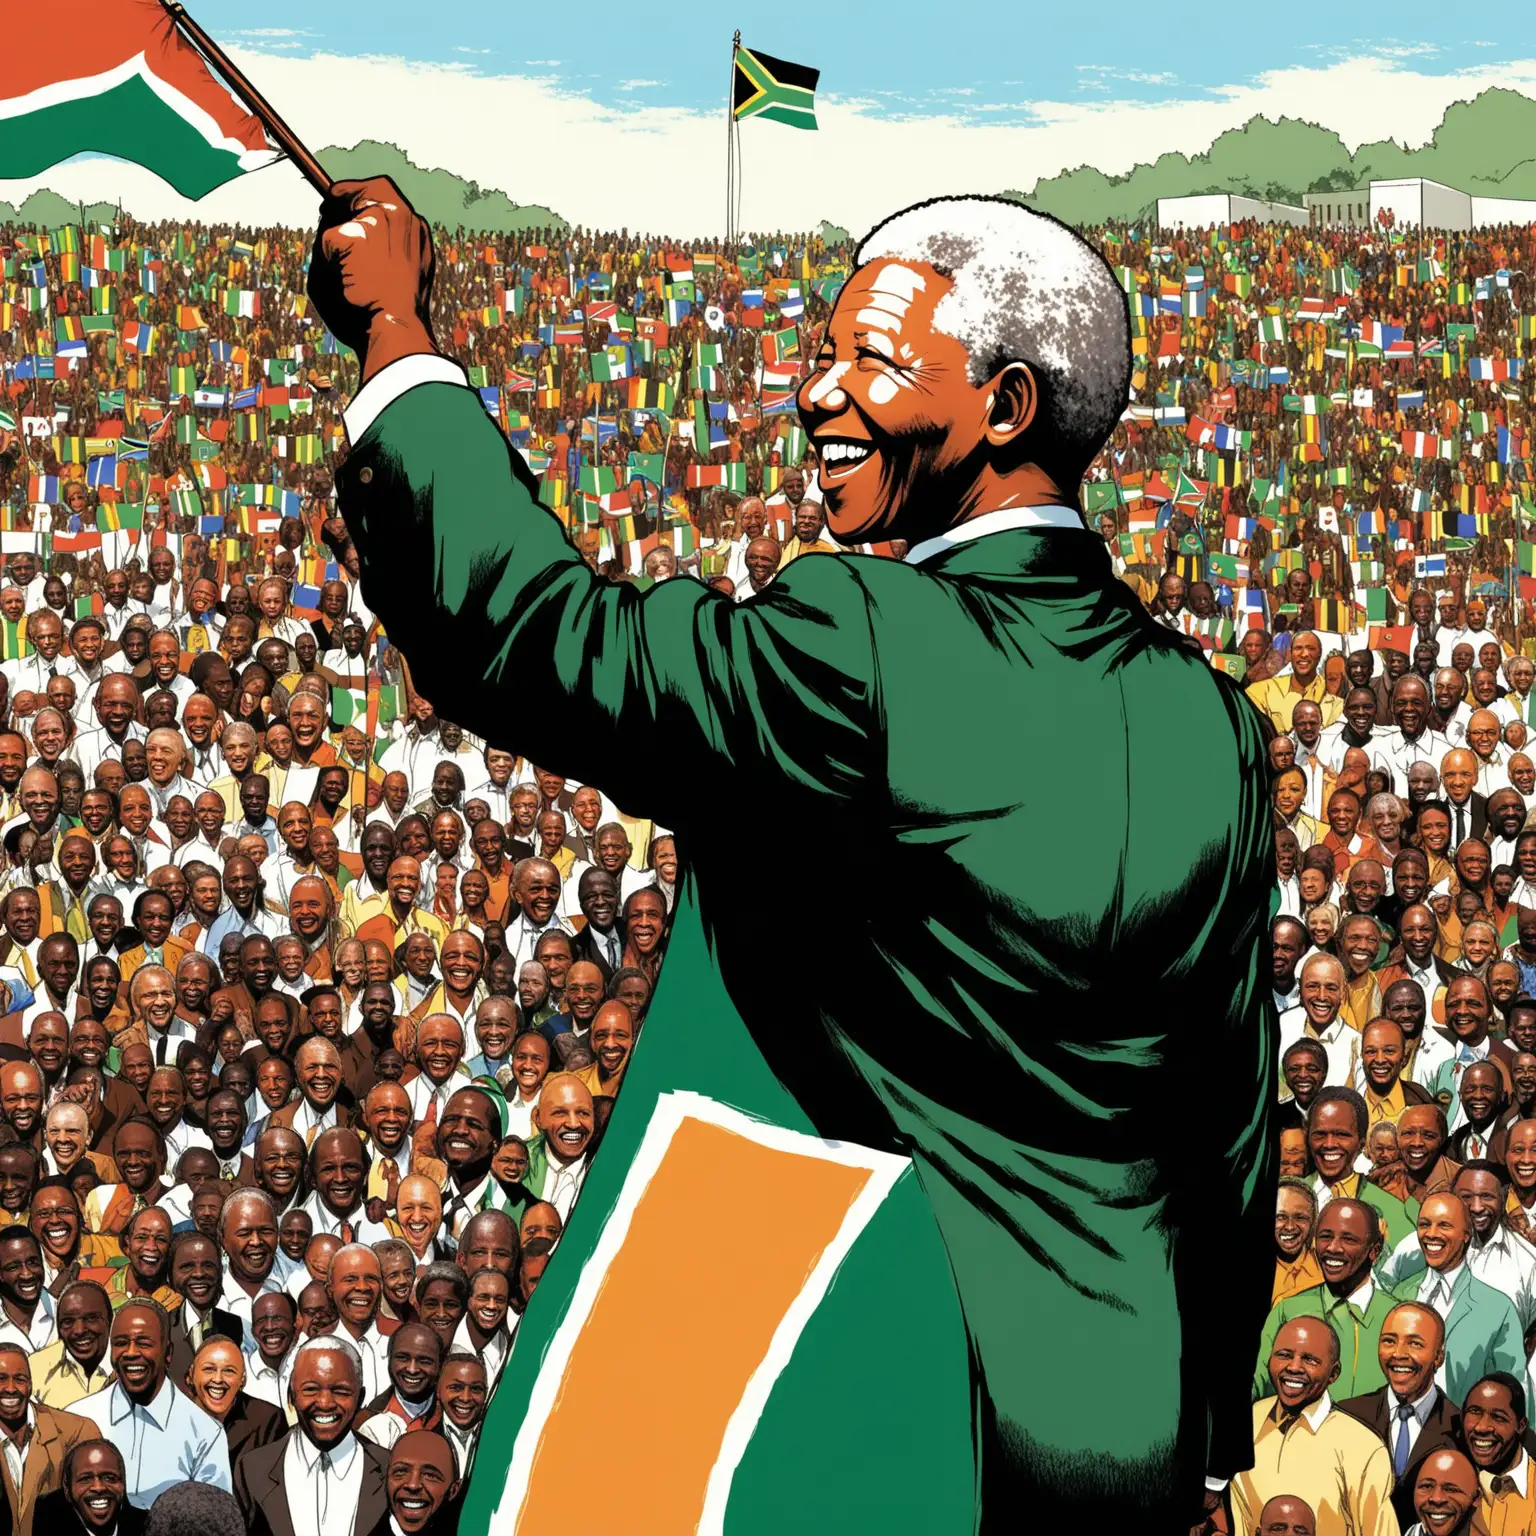 Illustrate Nelson Mandela as the first black president of South Africa, smiling, holding south african flag, addressing a crowd with people of all races together in harmony.